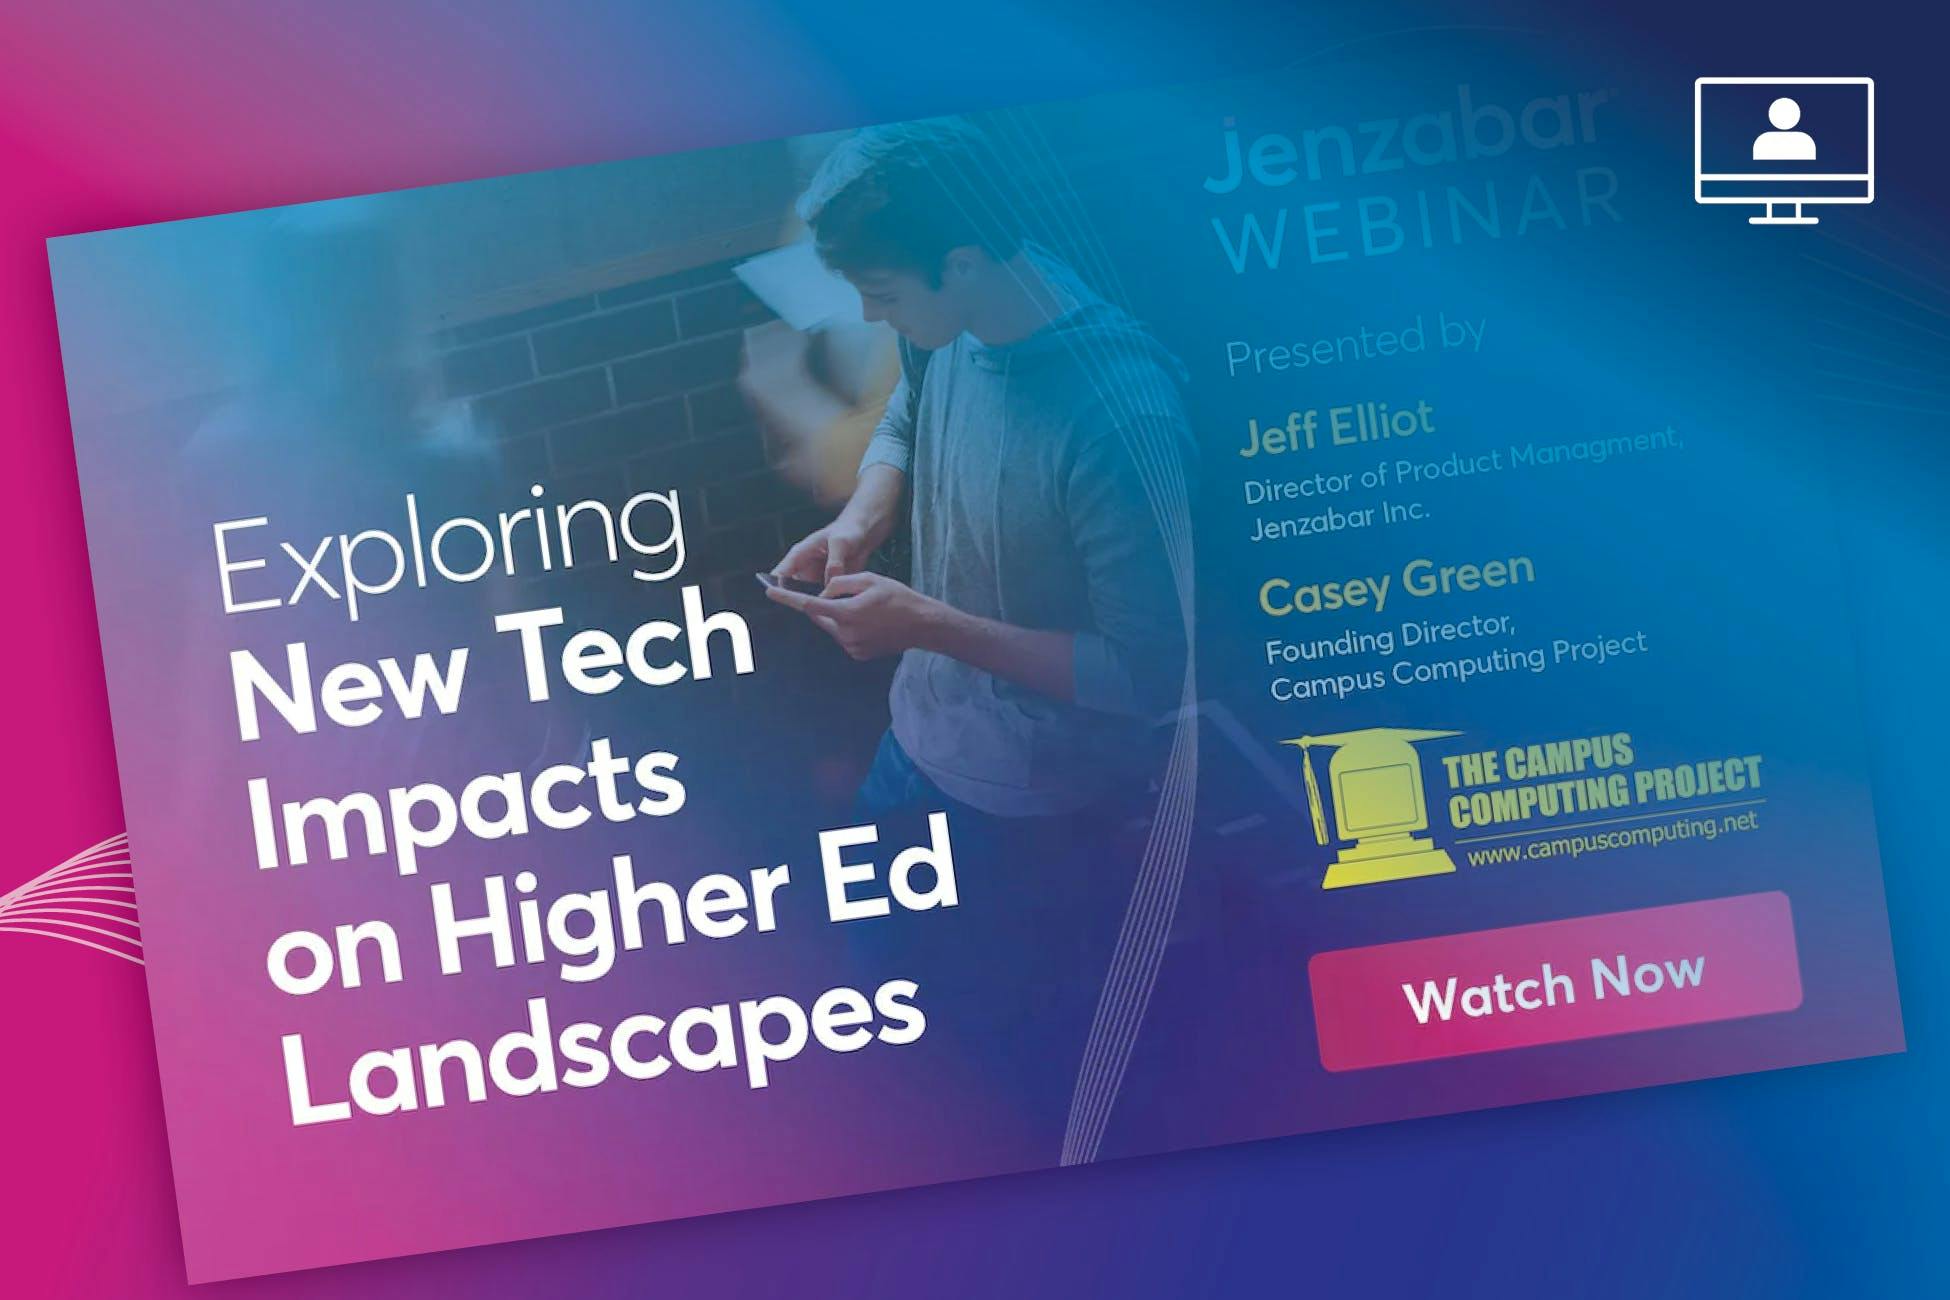 Webinar: Exploring New Tech Impacts on Higher Education Landscapes